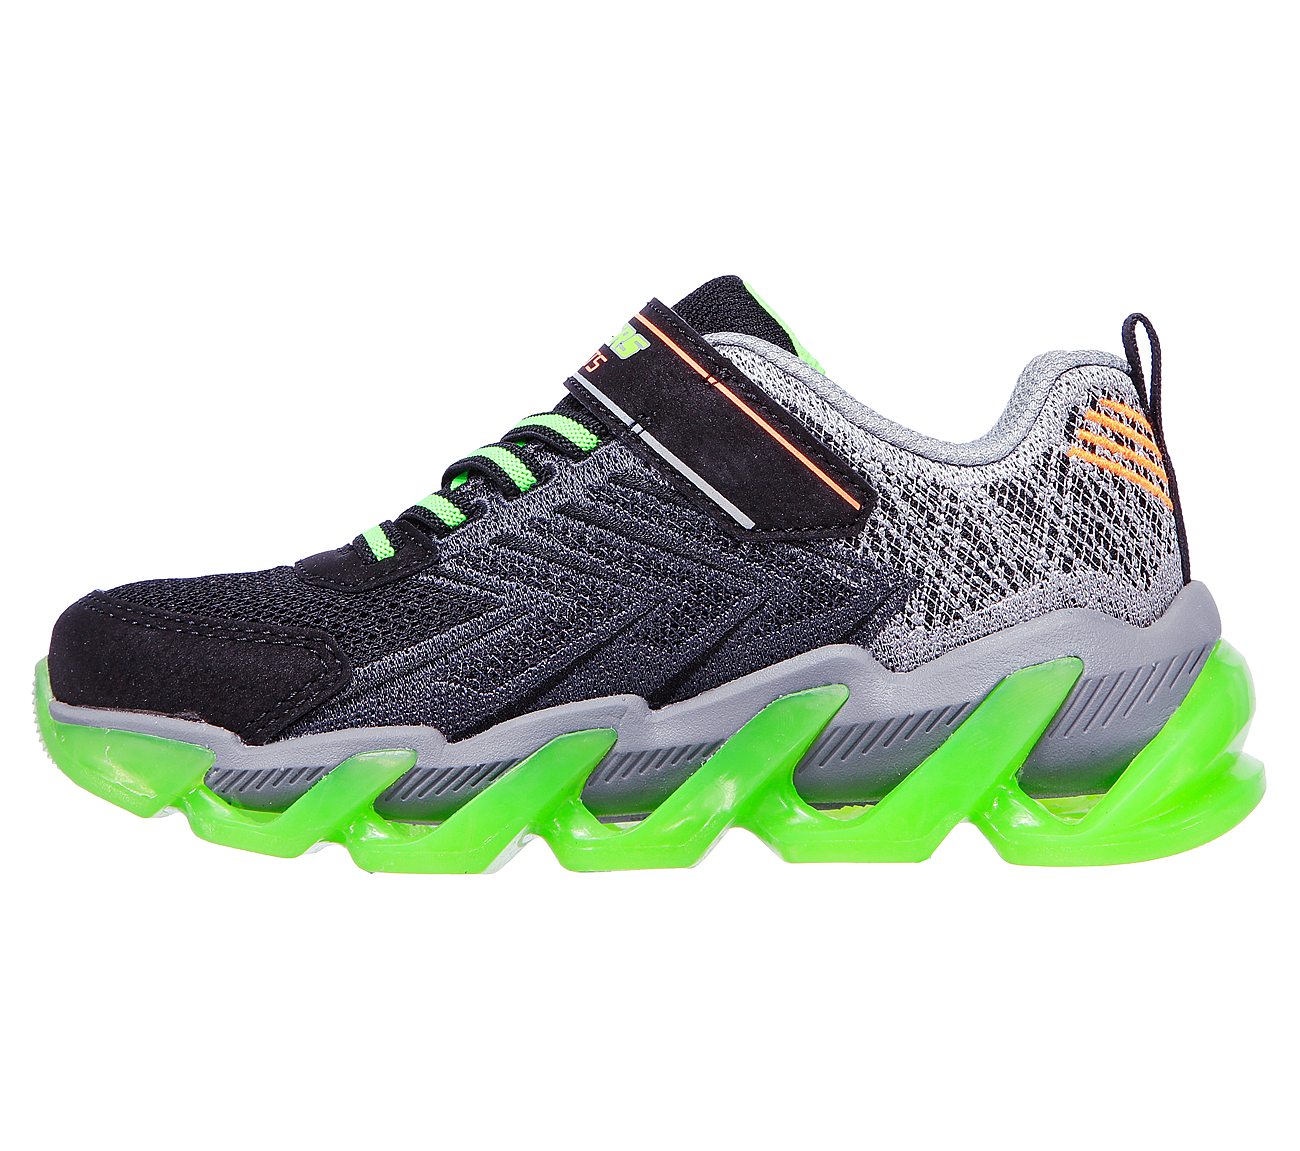 Skechers Kids S-Lights Mega Surge Trainers - Grey / Green - The Foot Factory